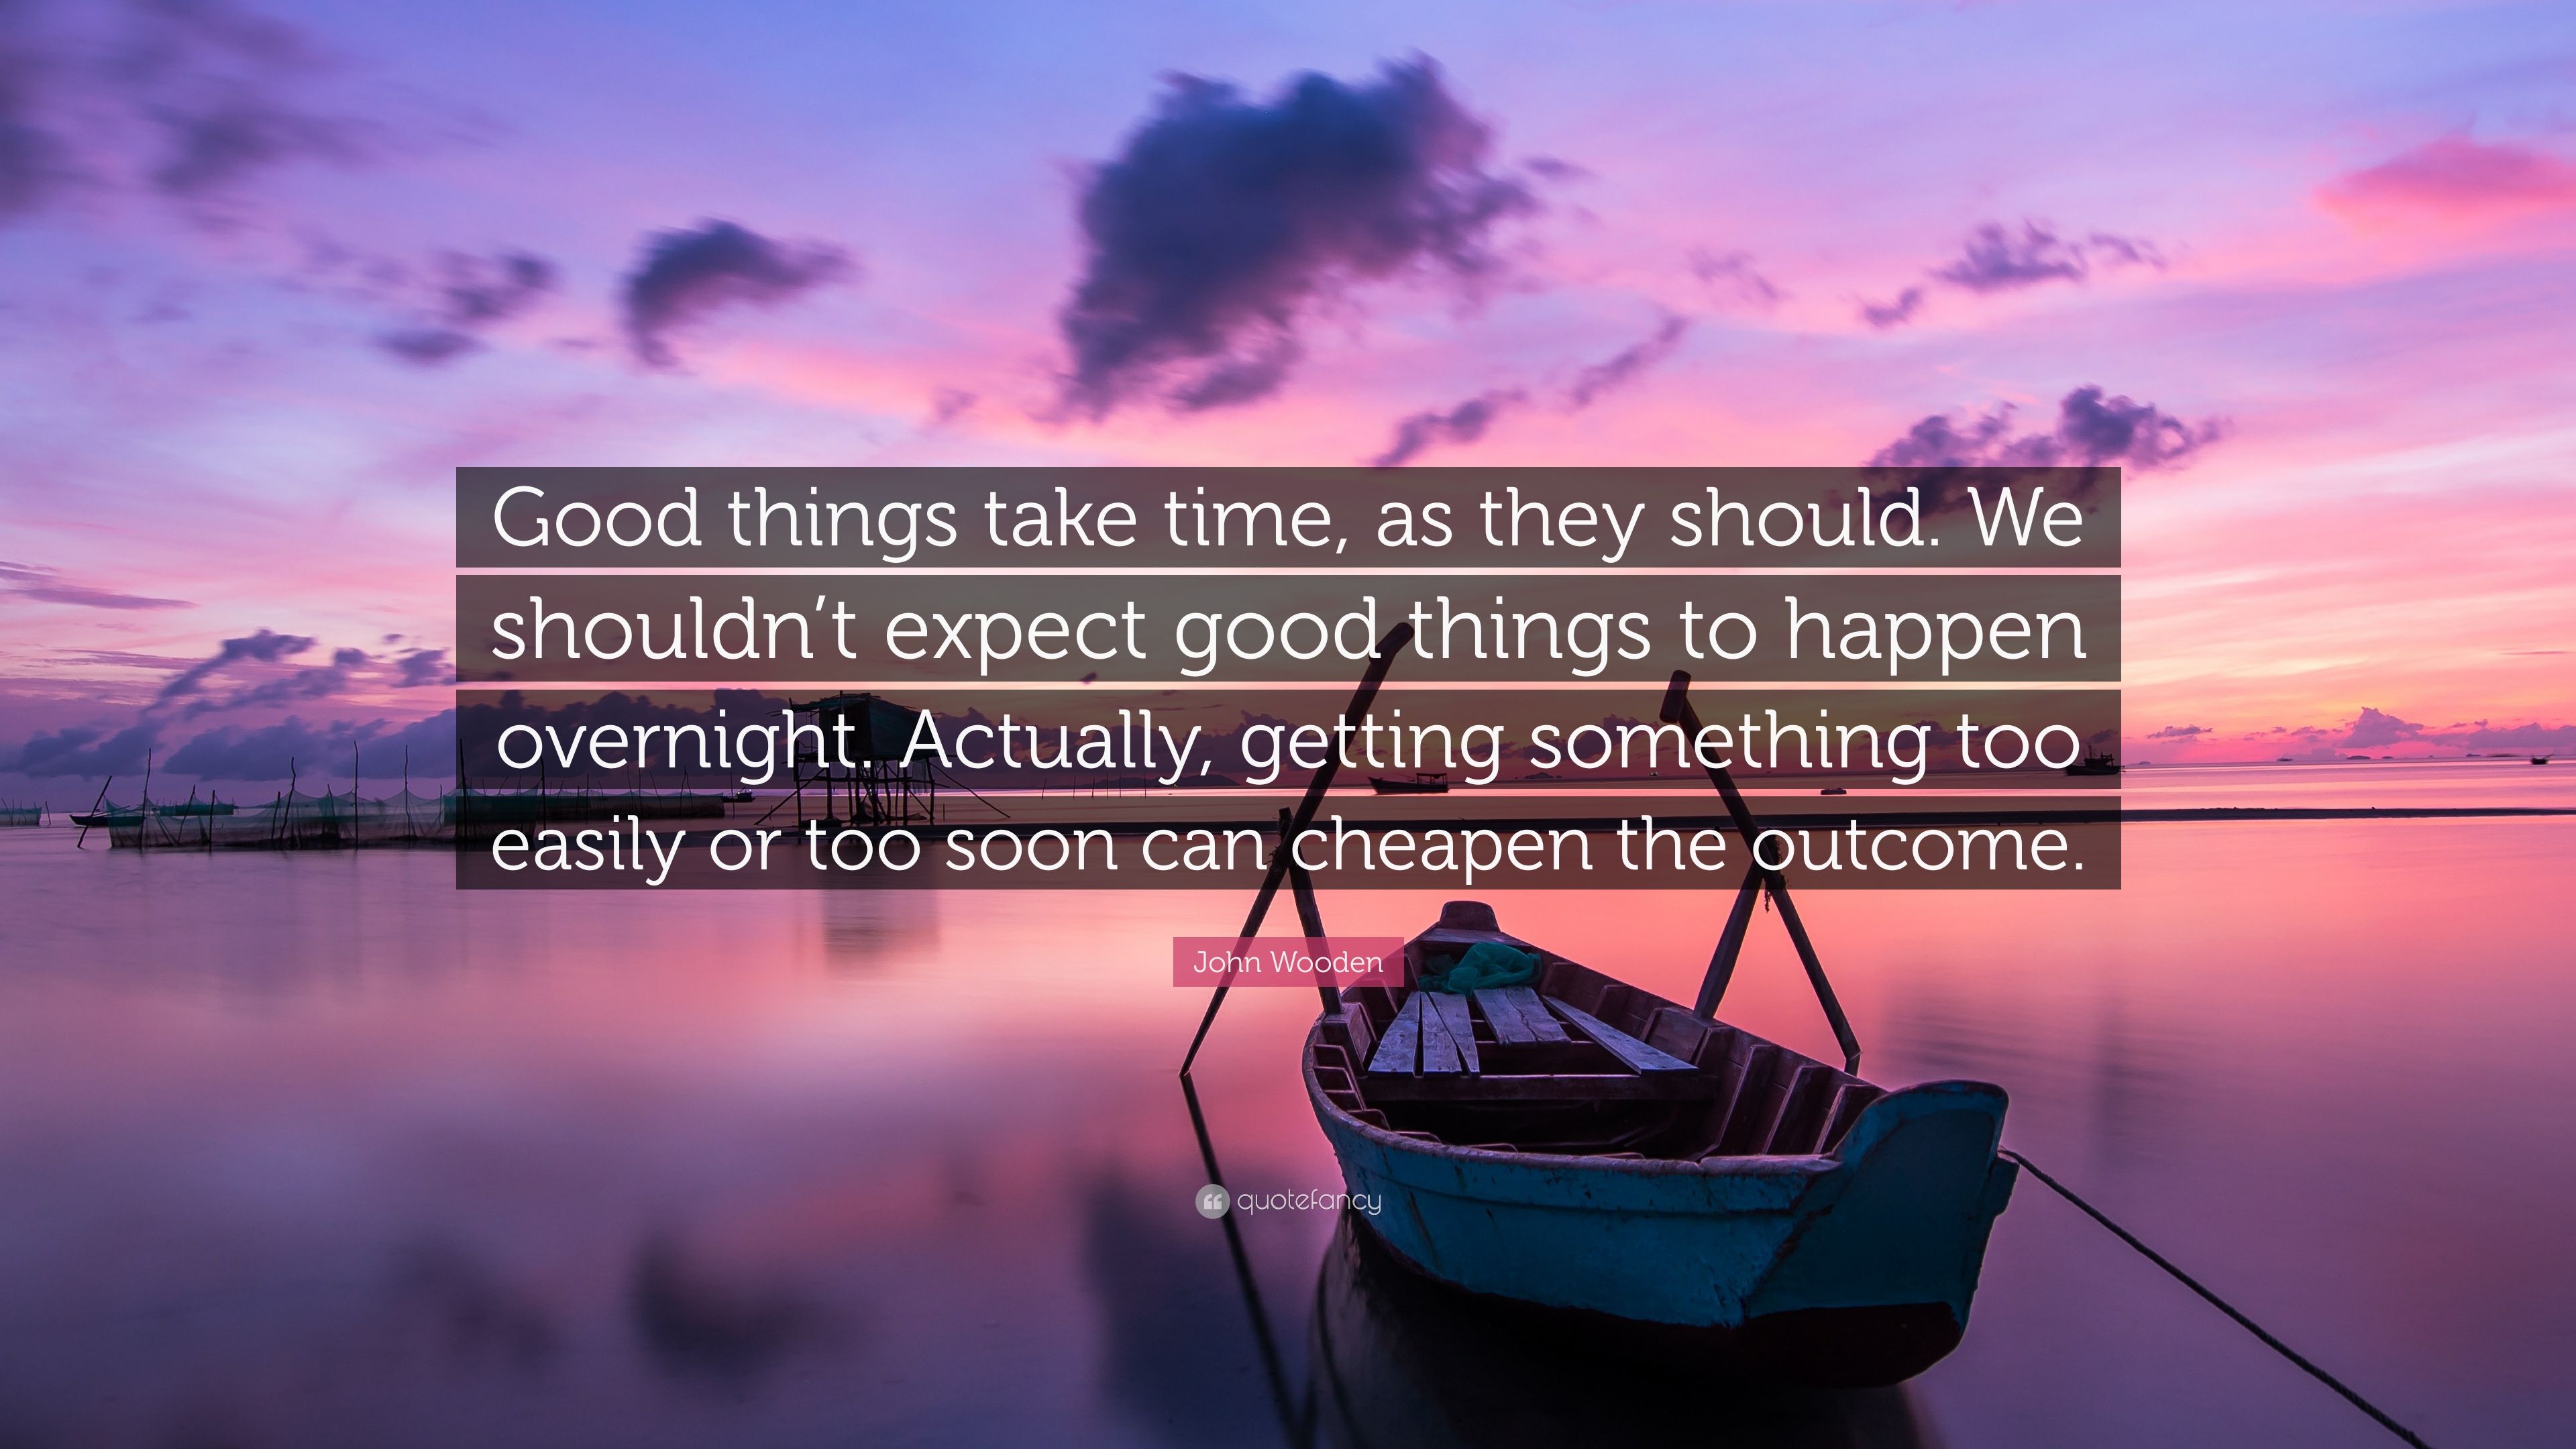 John Wooden Quote: “Good things take time, as they should. We